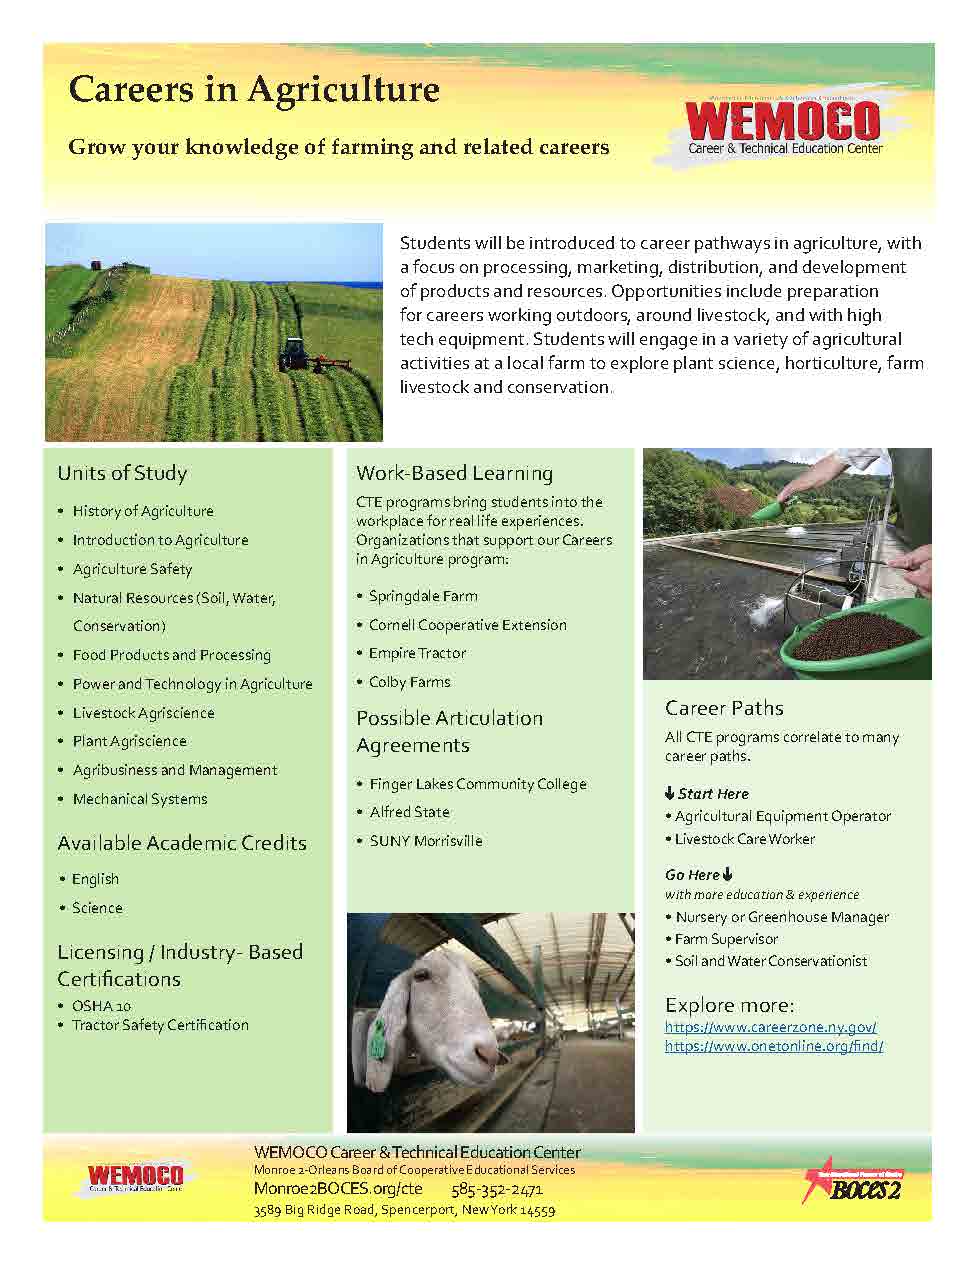 Careers in Agriculture